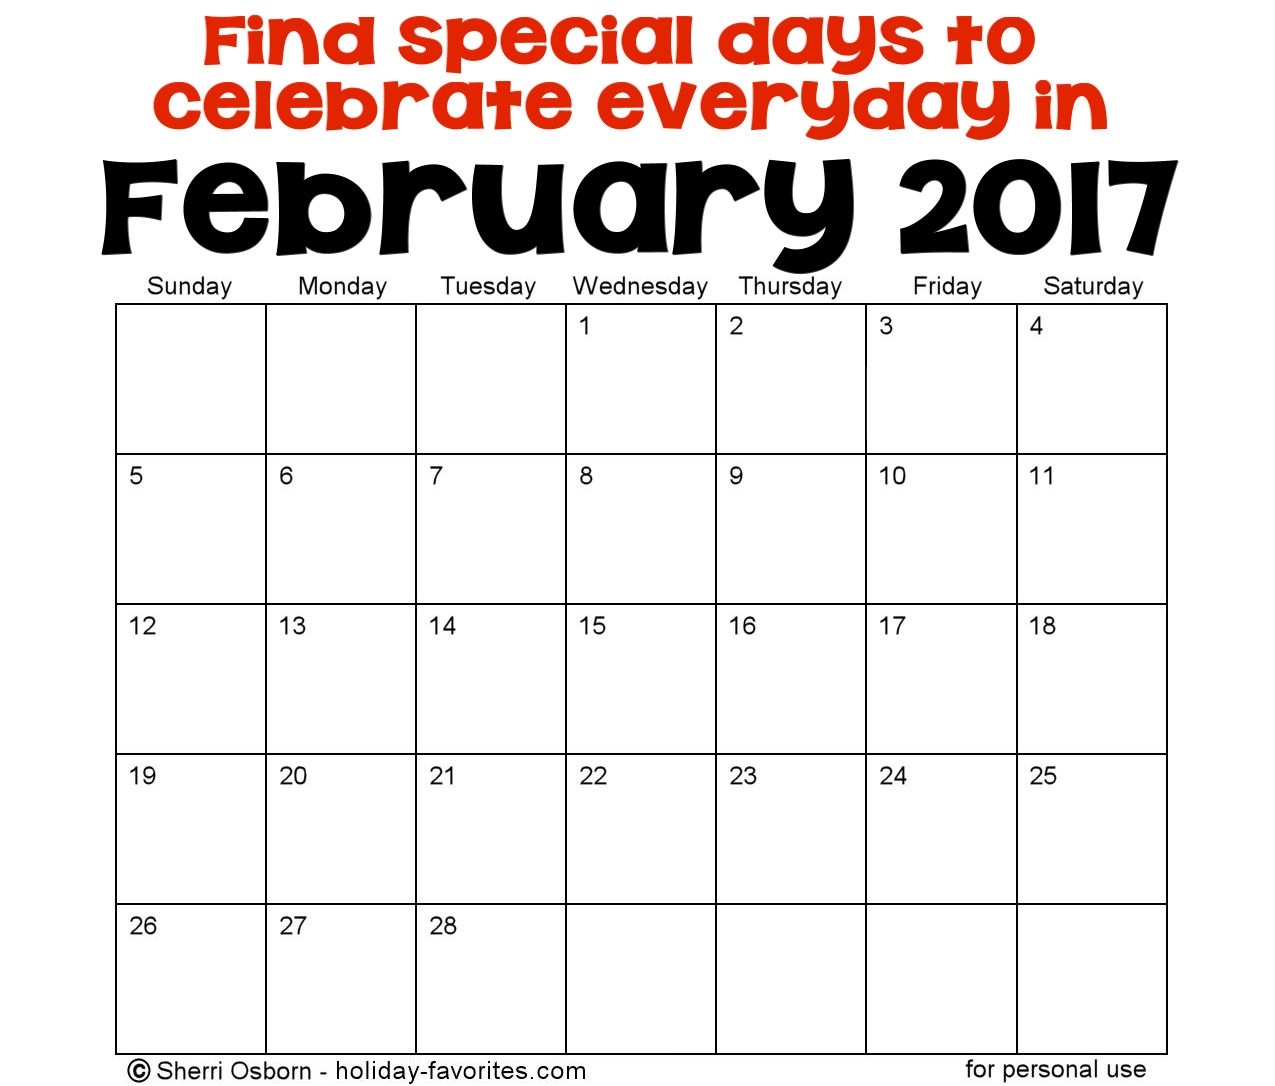 February Holidays And Special Days | Holiday Favorites Monthly Calendar Of Special Days